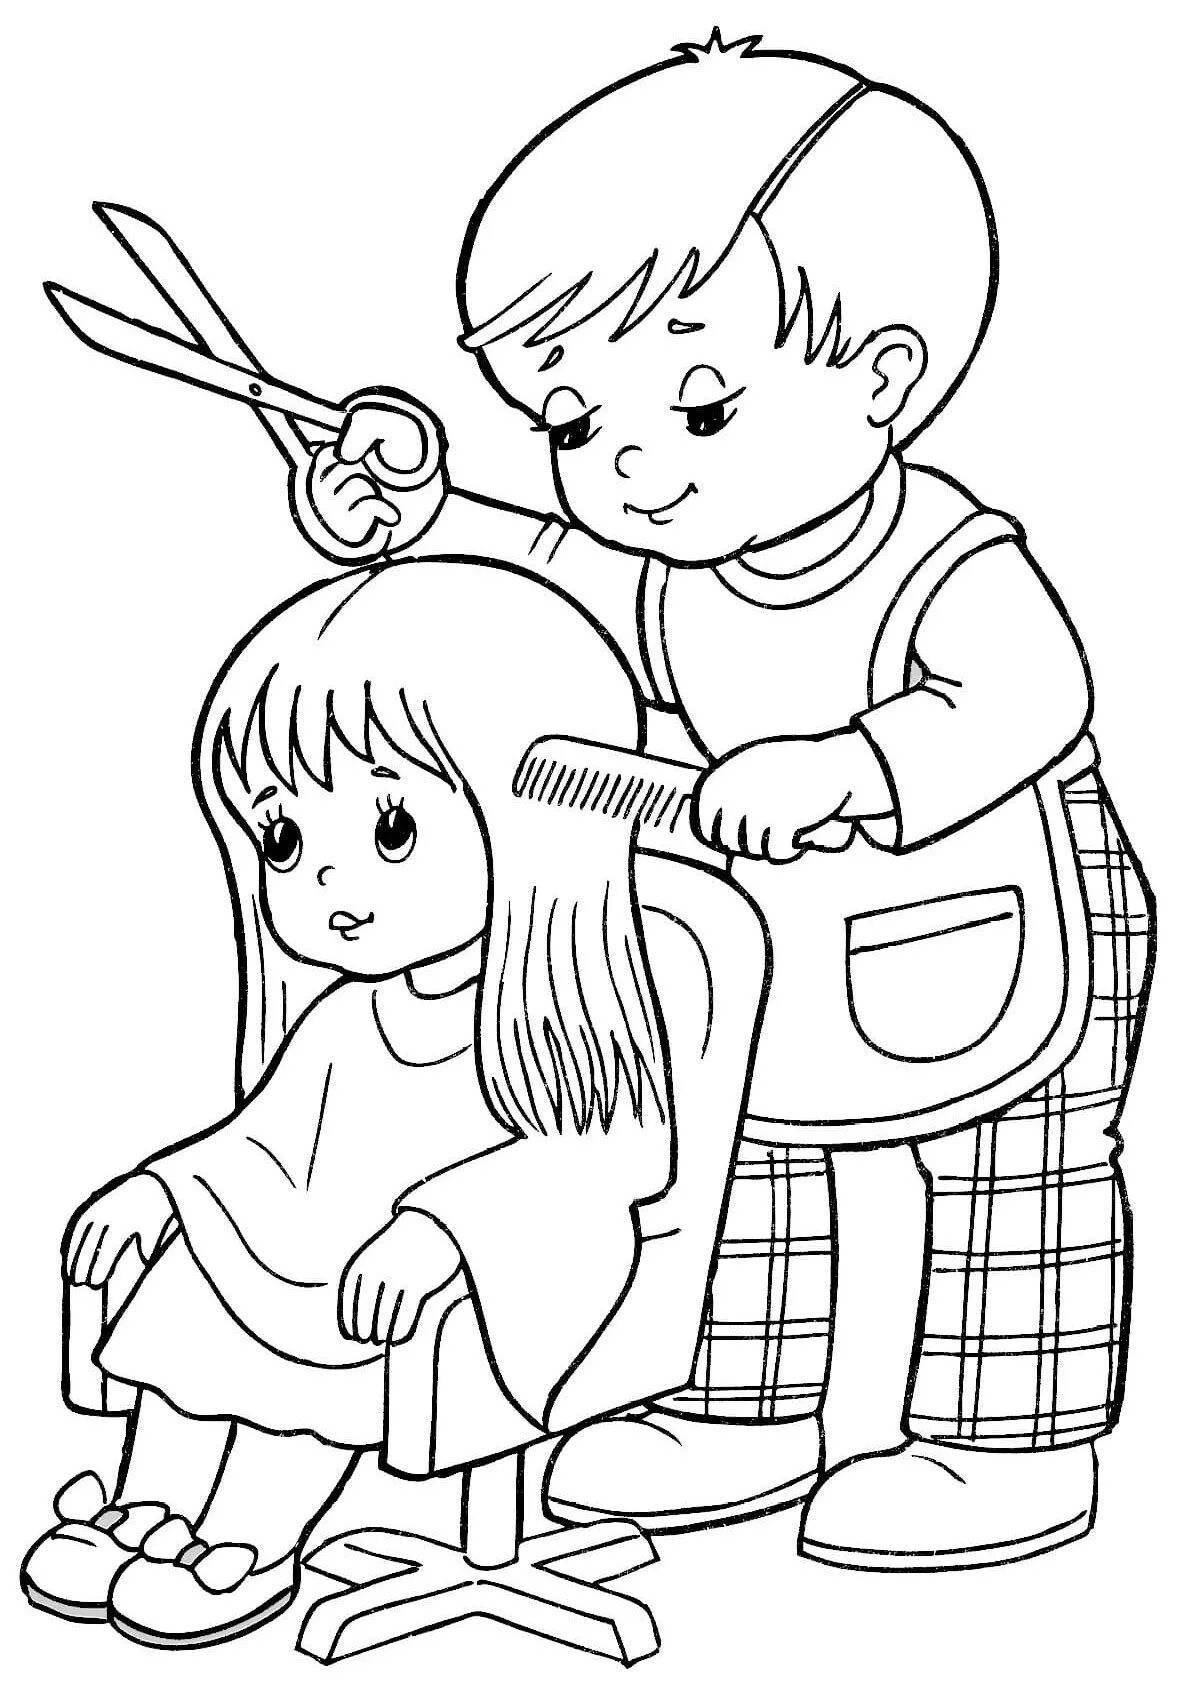 Charming coloring book kindergarten for toddlers